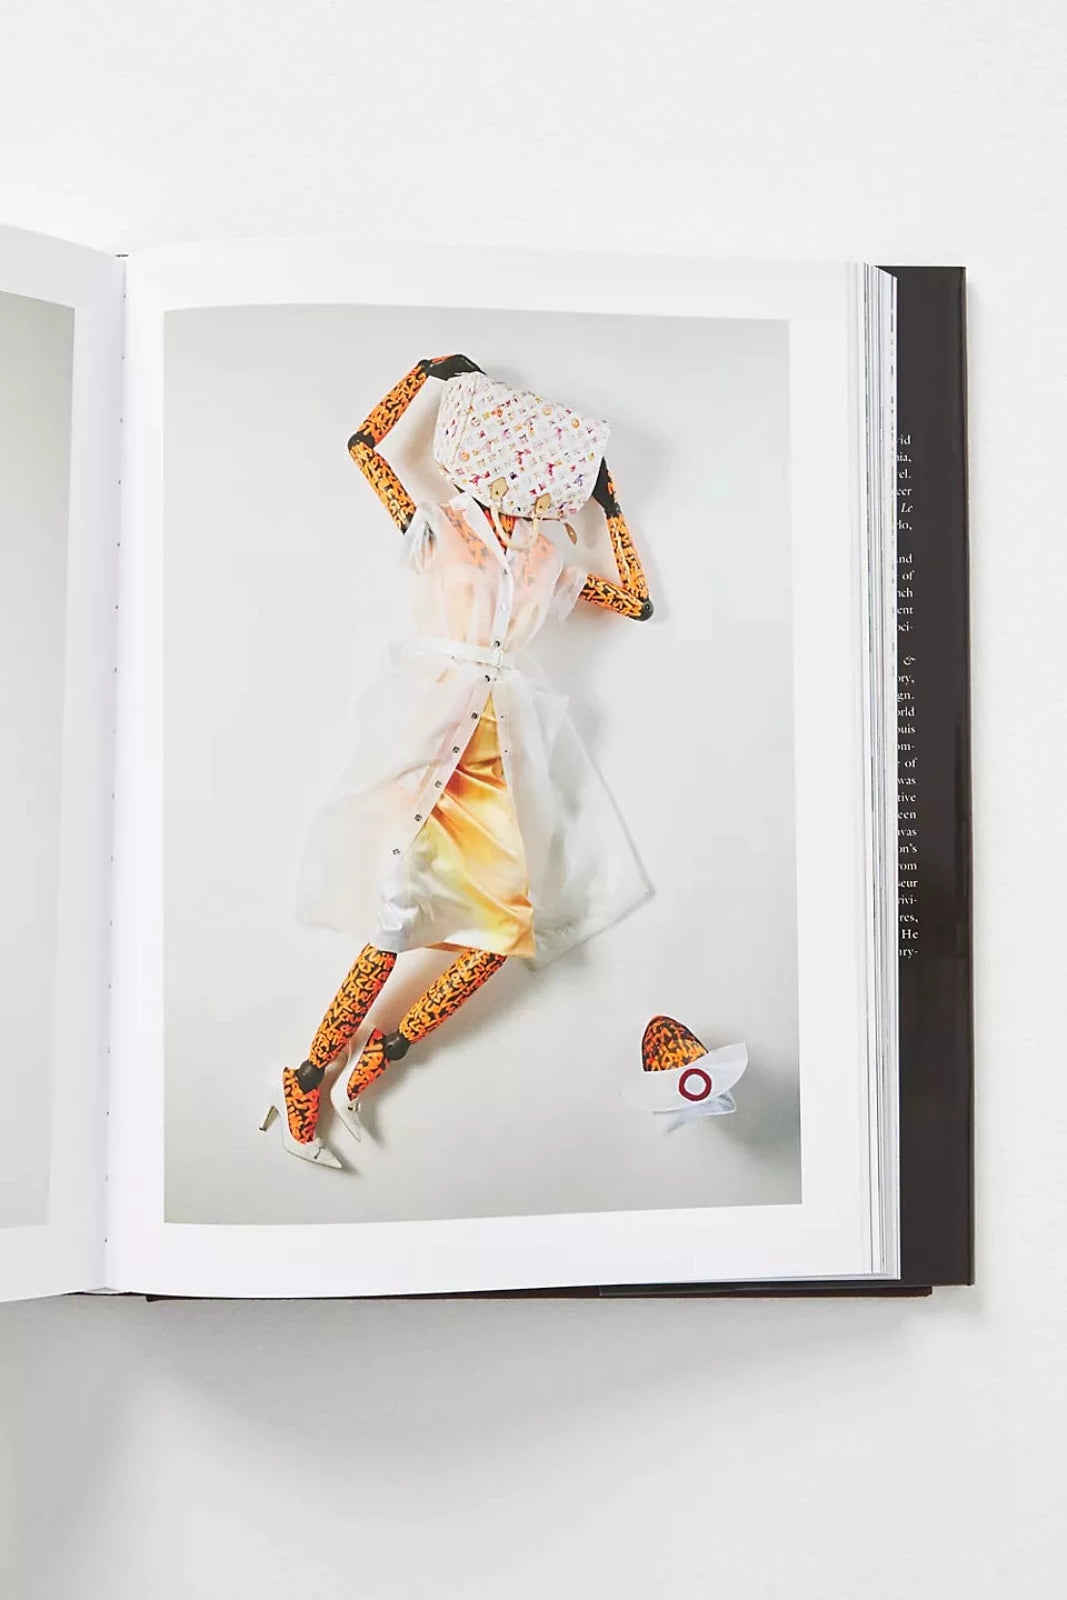 Louis Vuitton The Birth of Modern Luxury Book, 2005 at 1stDibs